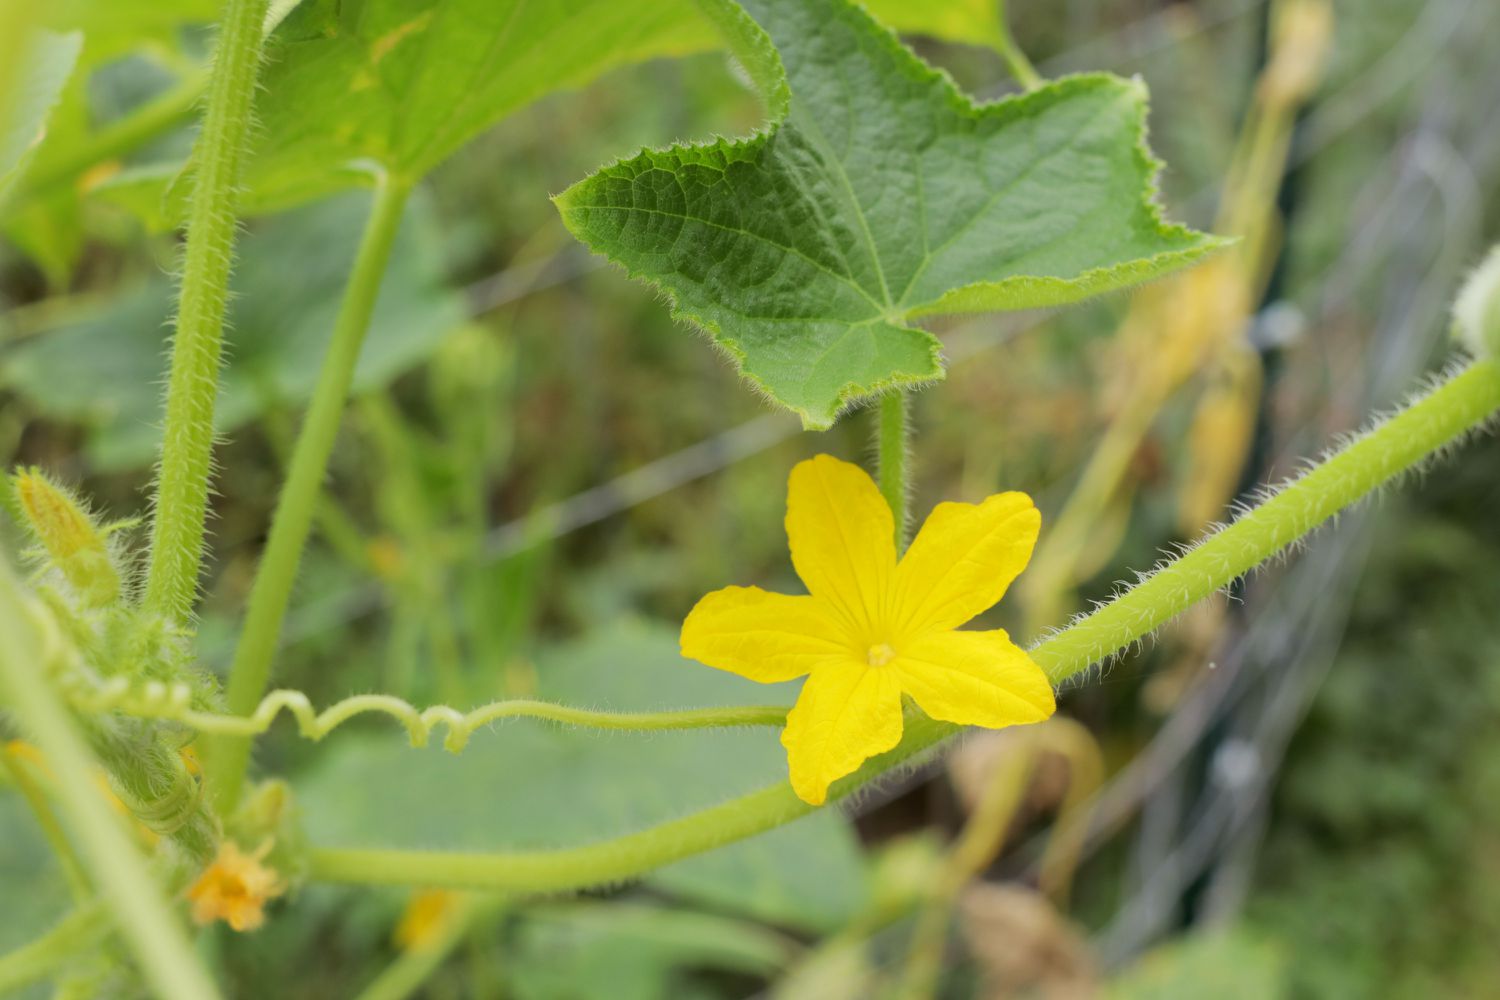 Lemon cucumber plant vine with small yellow flower and leaf closeup